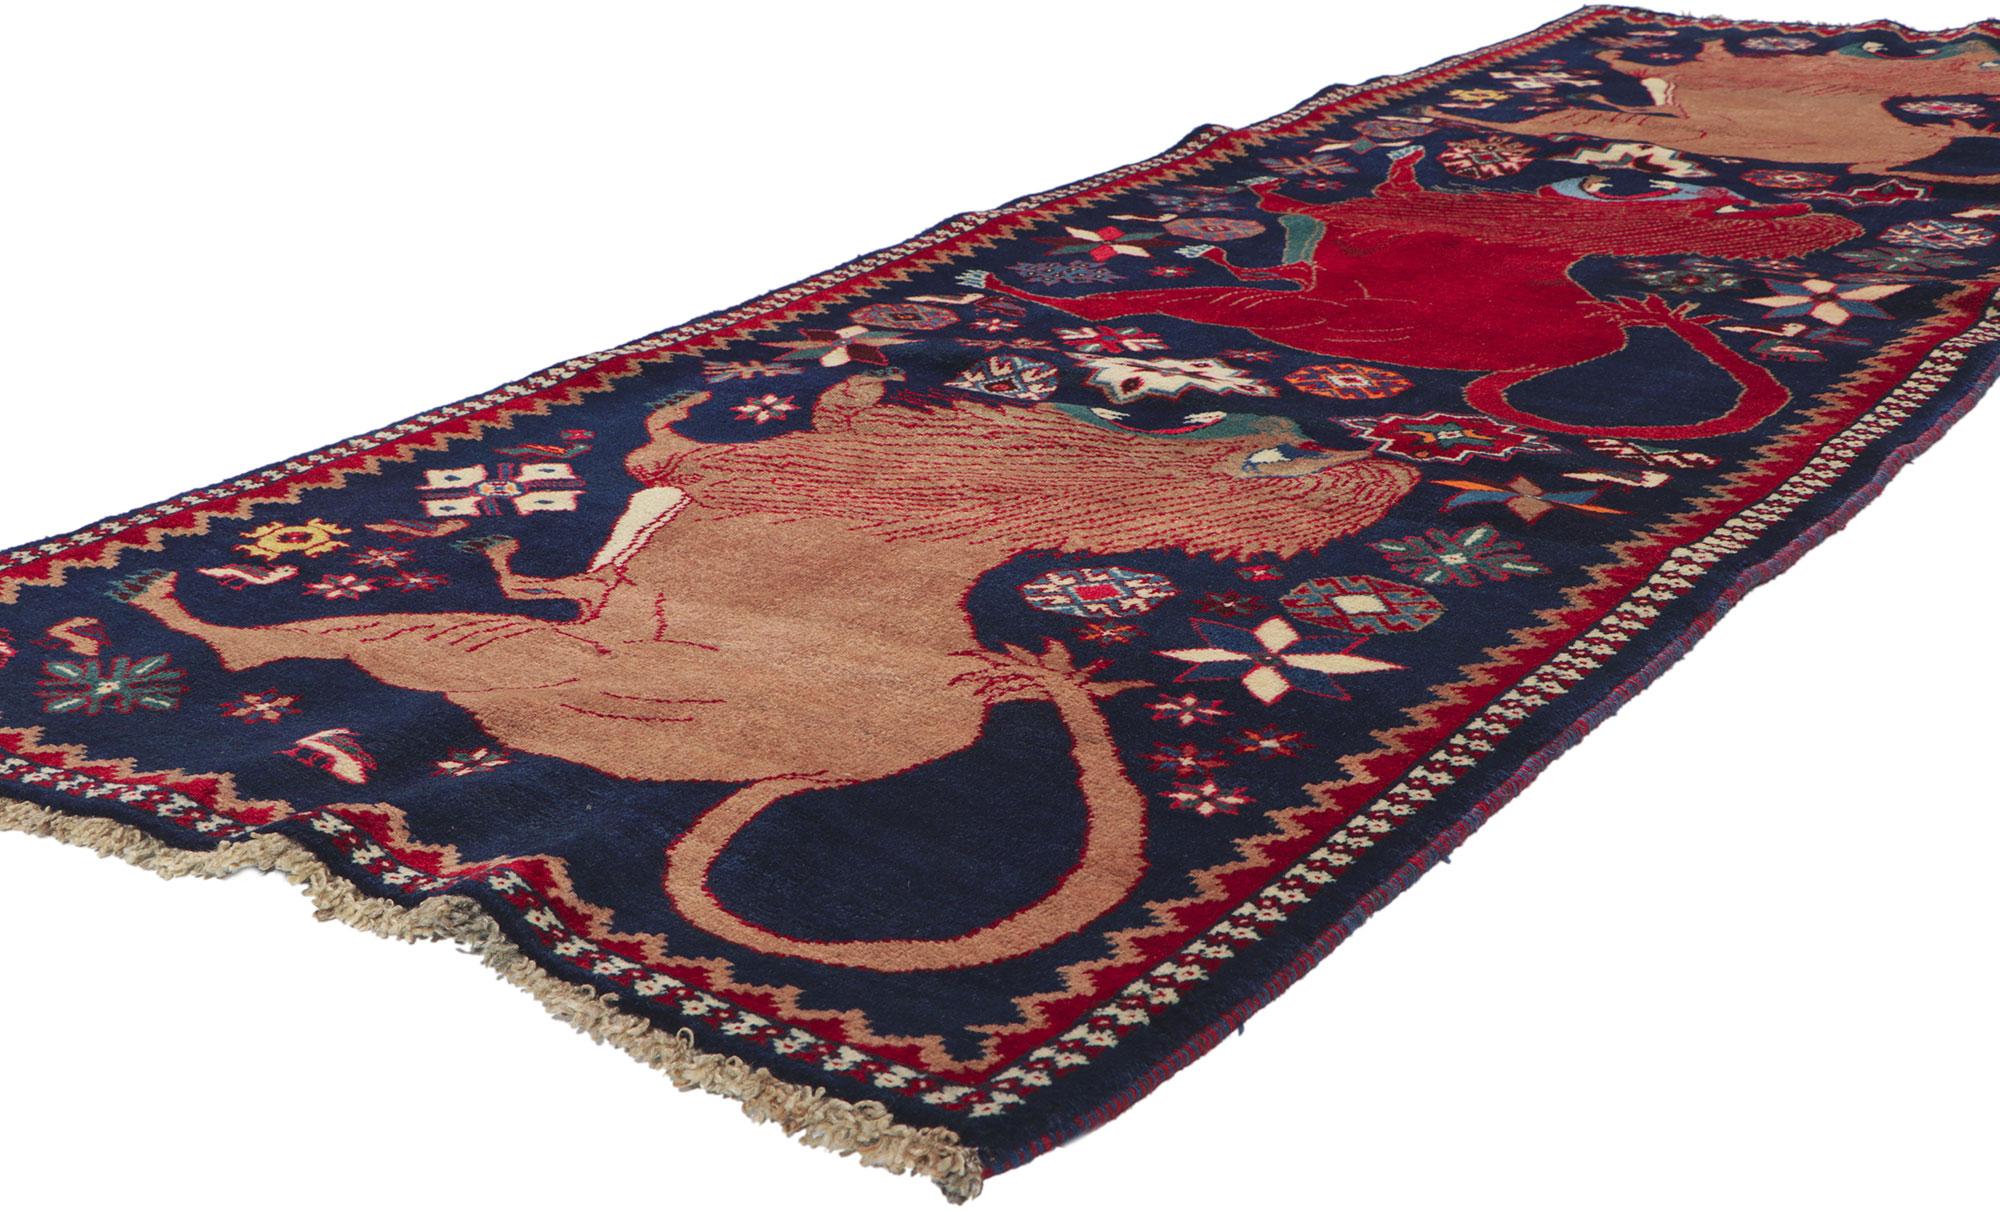 61055 Vintage Persian Qashqai Gabbeh Rug with Zoomorphic Design 03'03 x 09'03. Reminiscences of an exotic journey and worldly sophistication, this hand-knotted wool vintage Persian Qashqai Gabbeh rug is a captivating vision of woven beauty. The